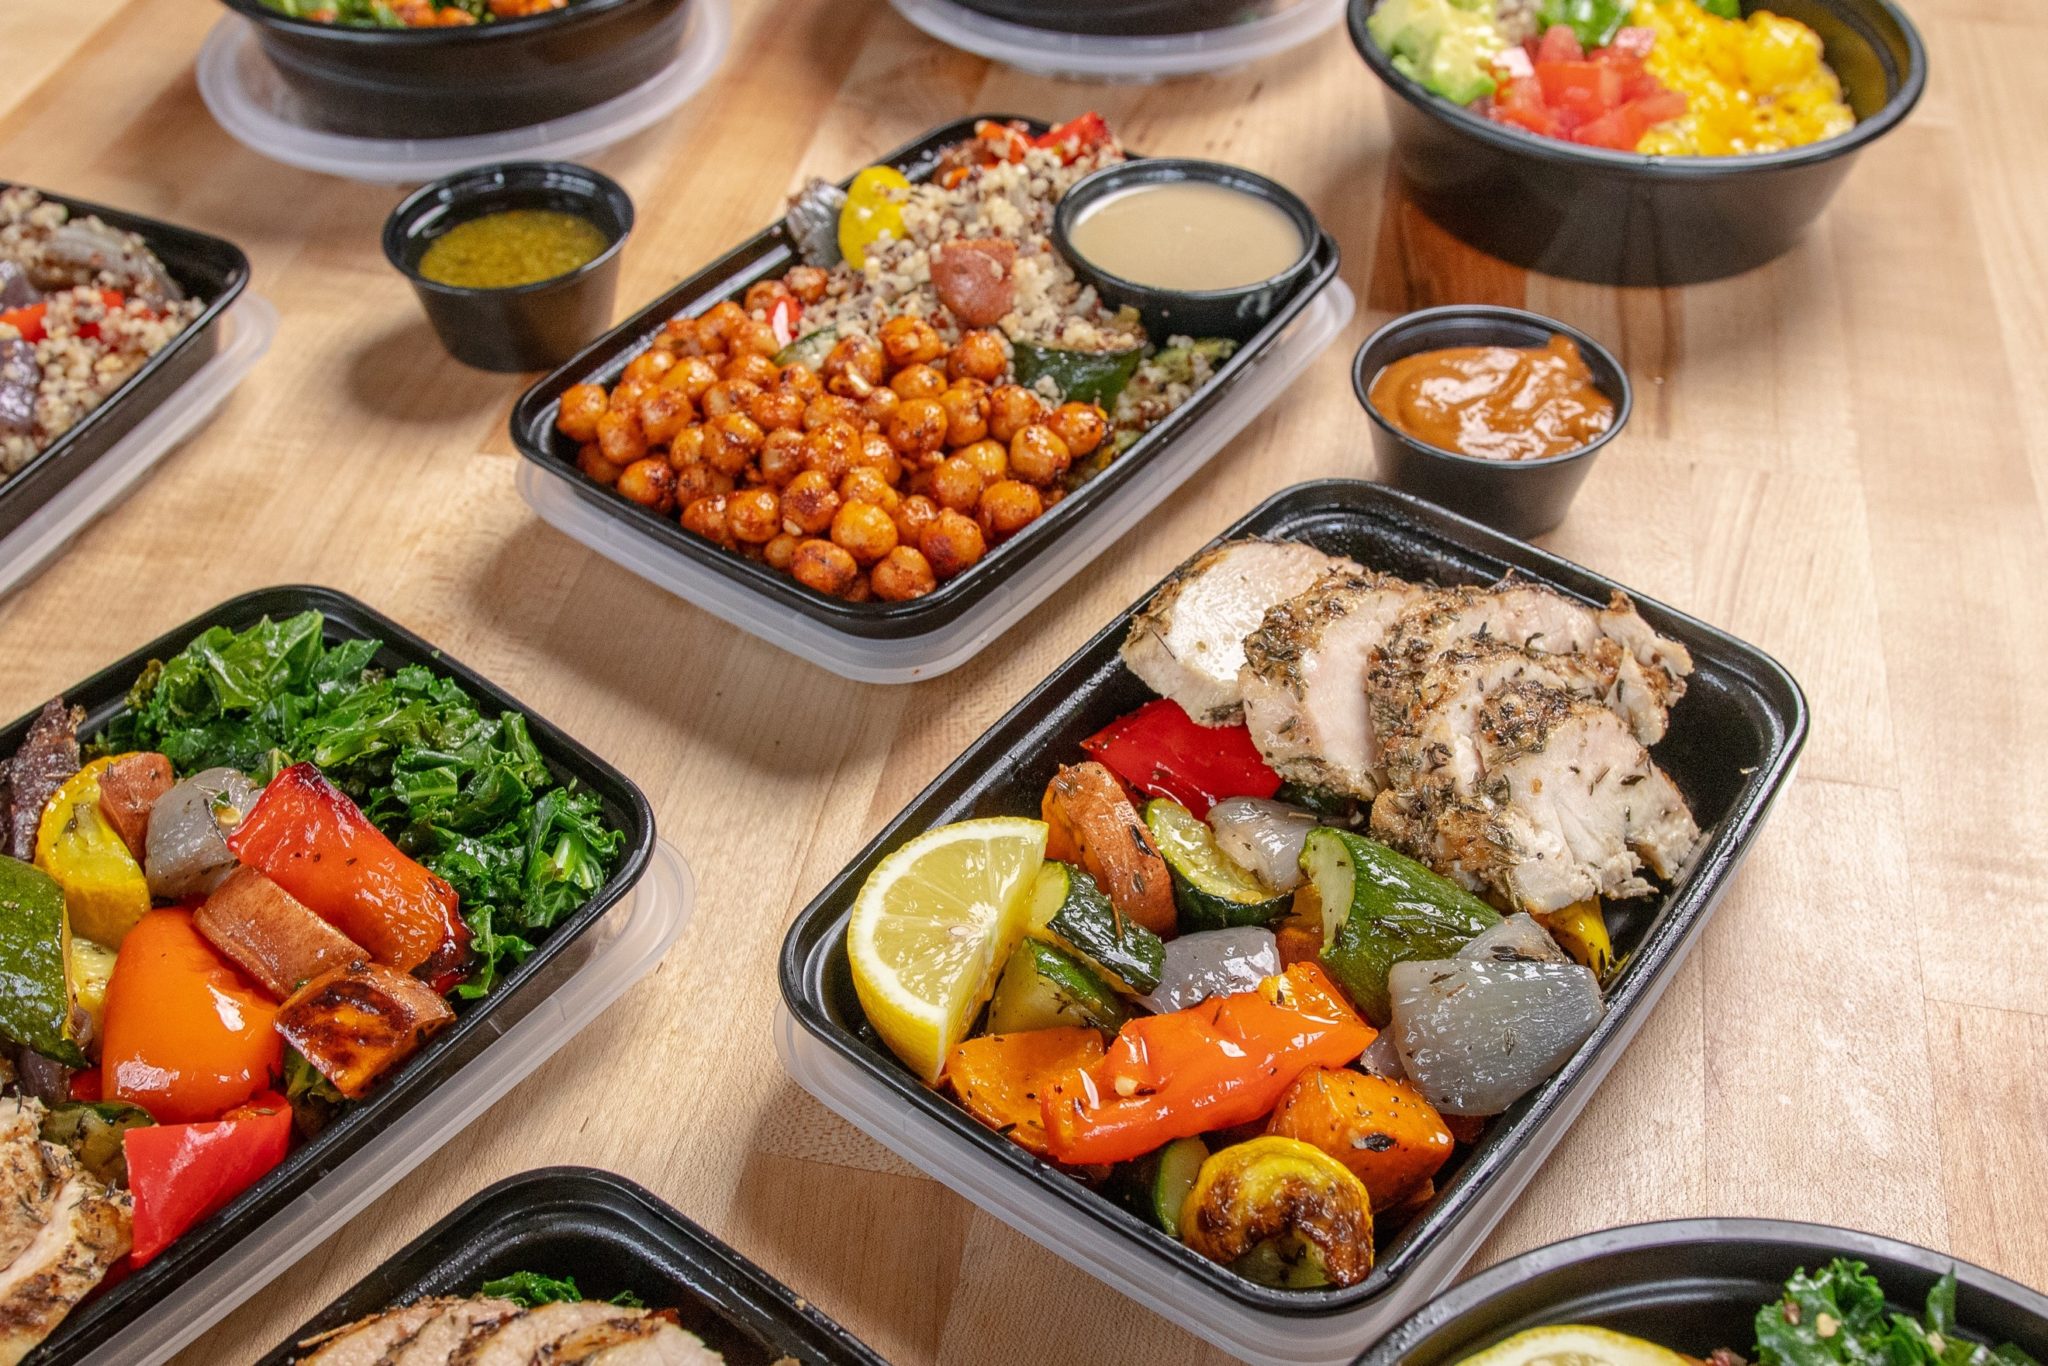 Find out how to Meal Prep for Choosy Eaters